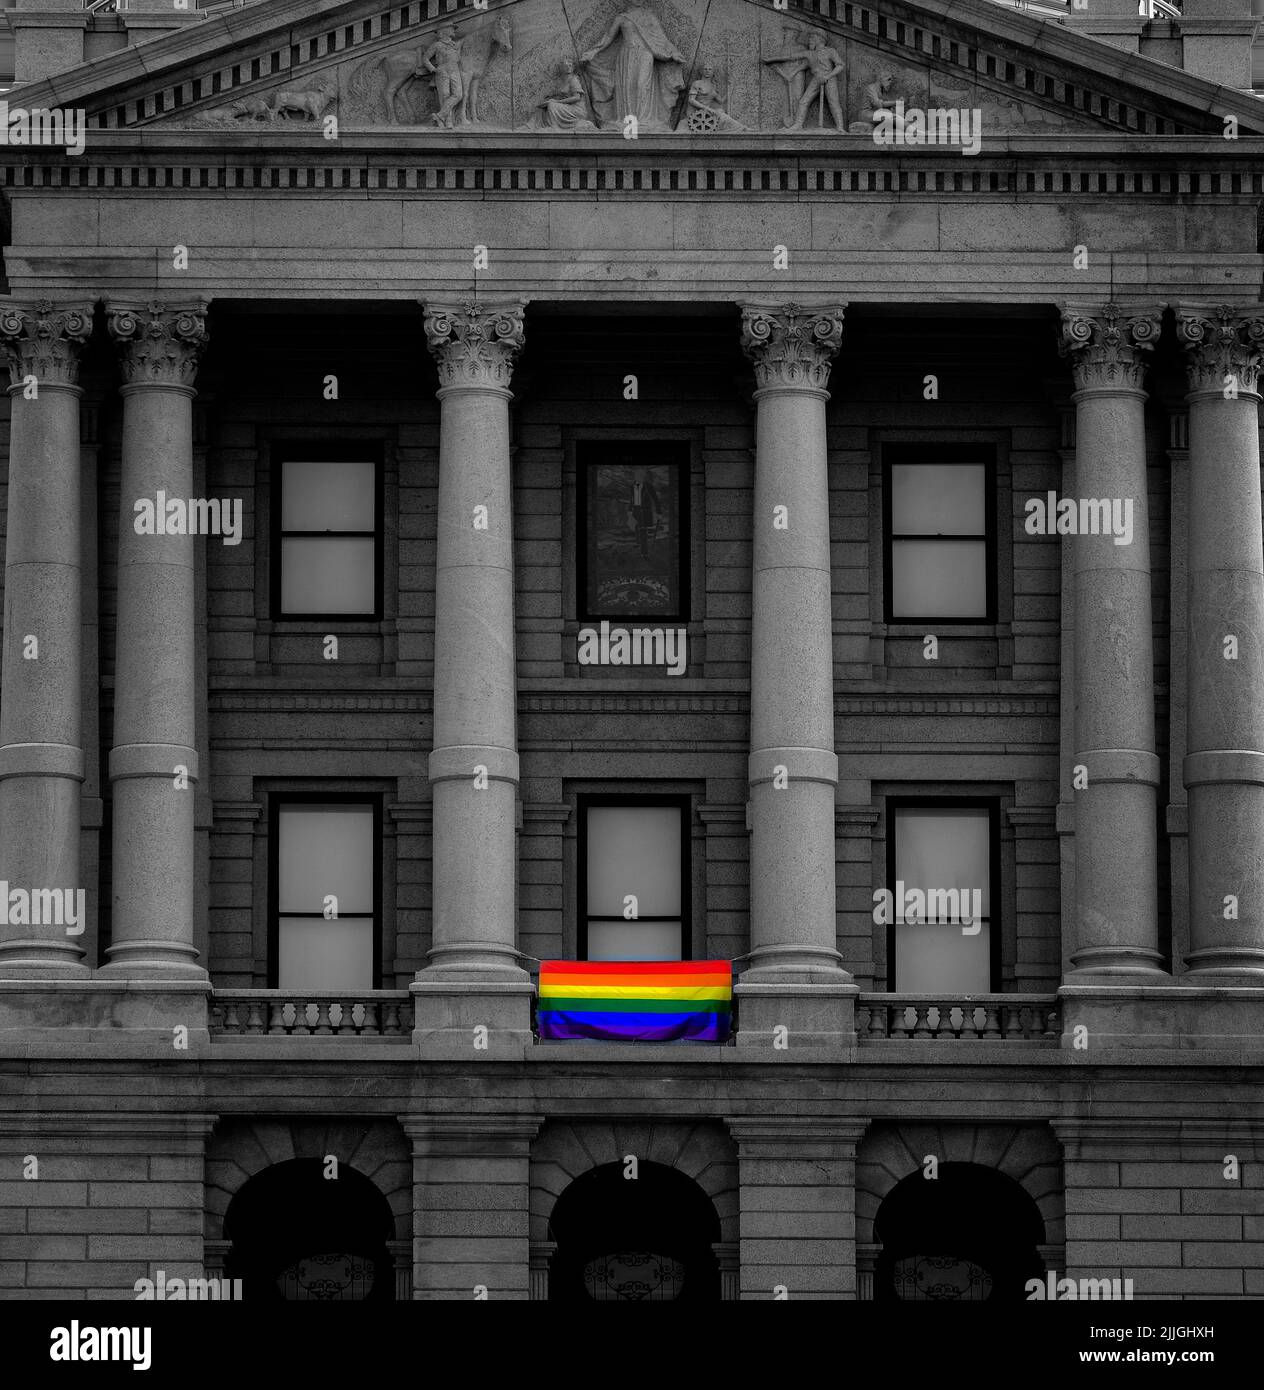 Government building displaying a Pride flag for LGBTQ rights and acceptance Stock Photo